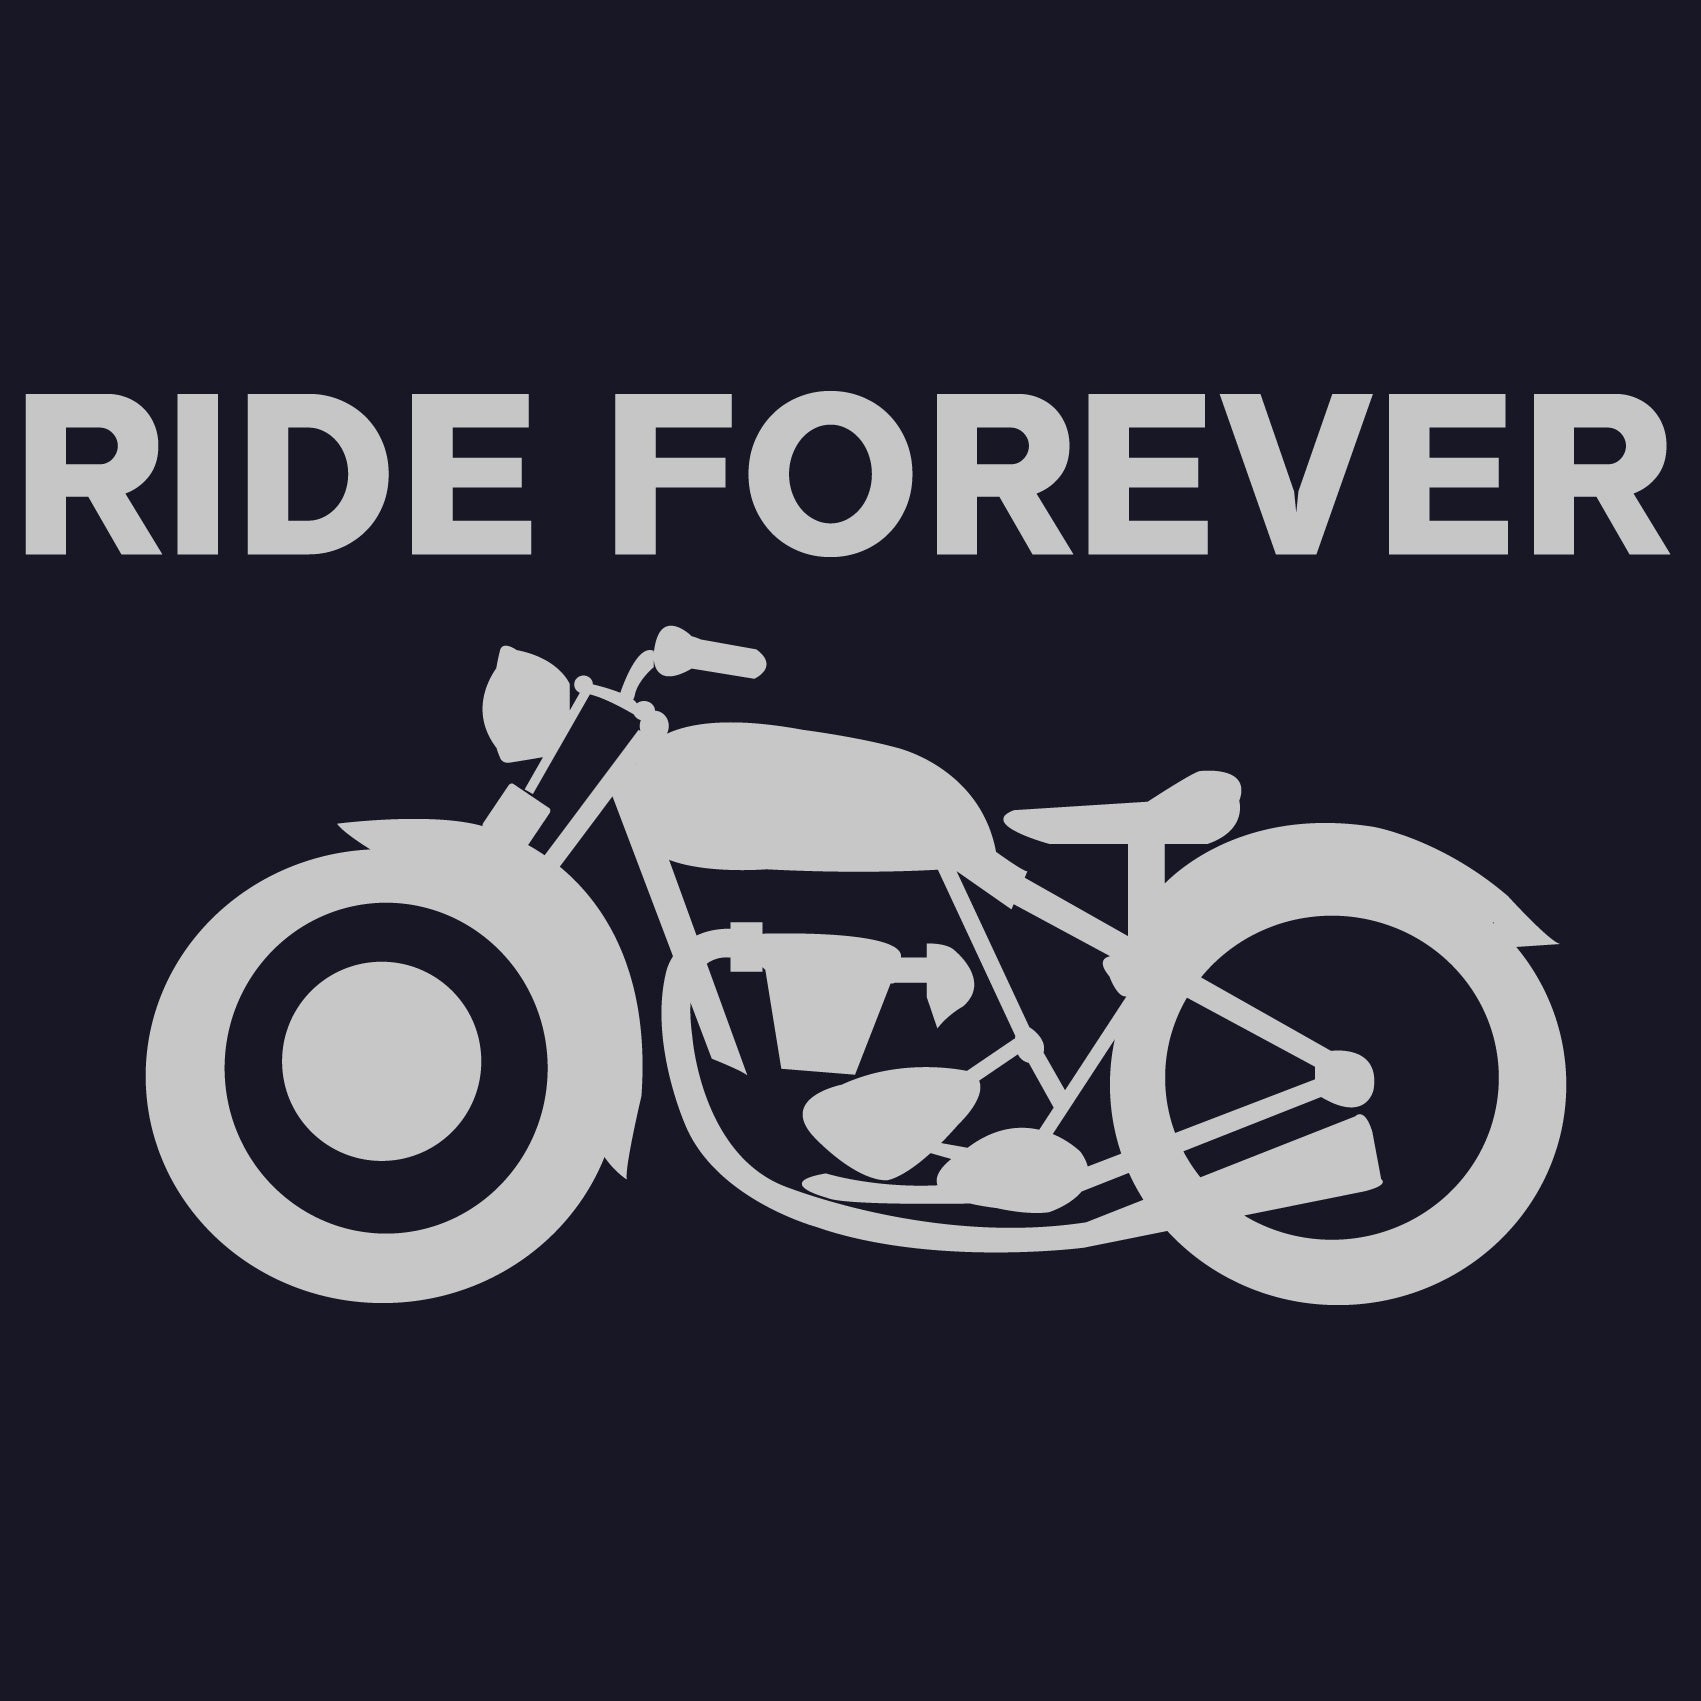 Ride Forever Reactr Tshirts For Men - Eyewearlabs